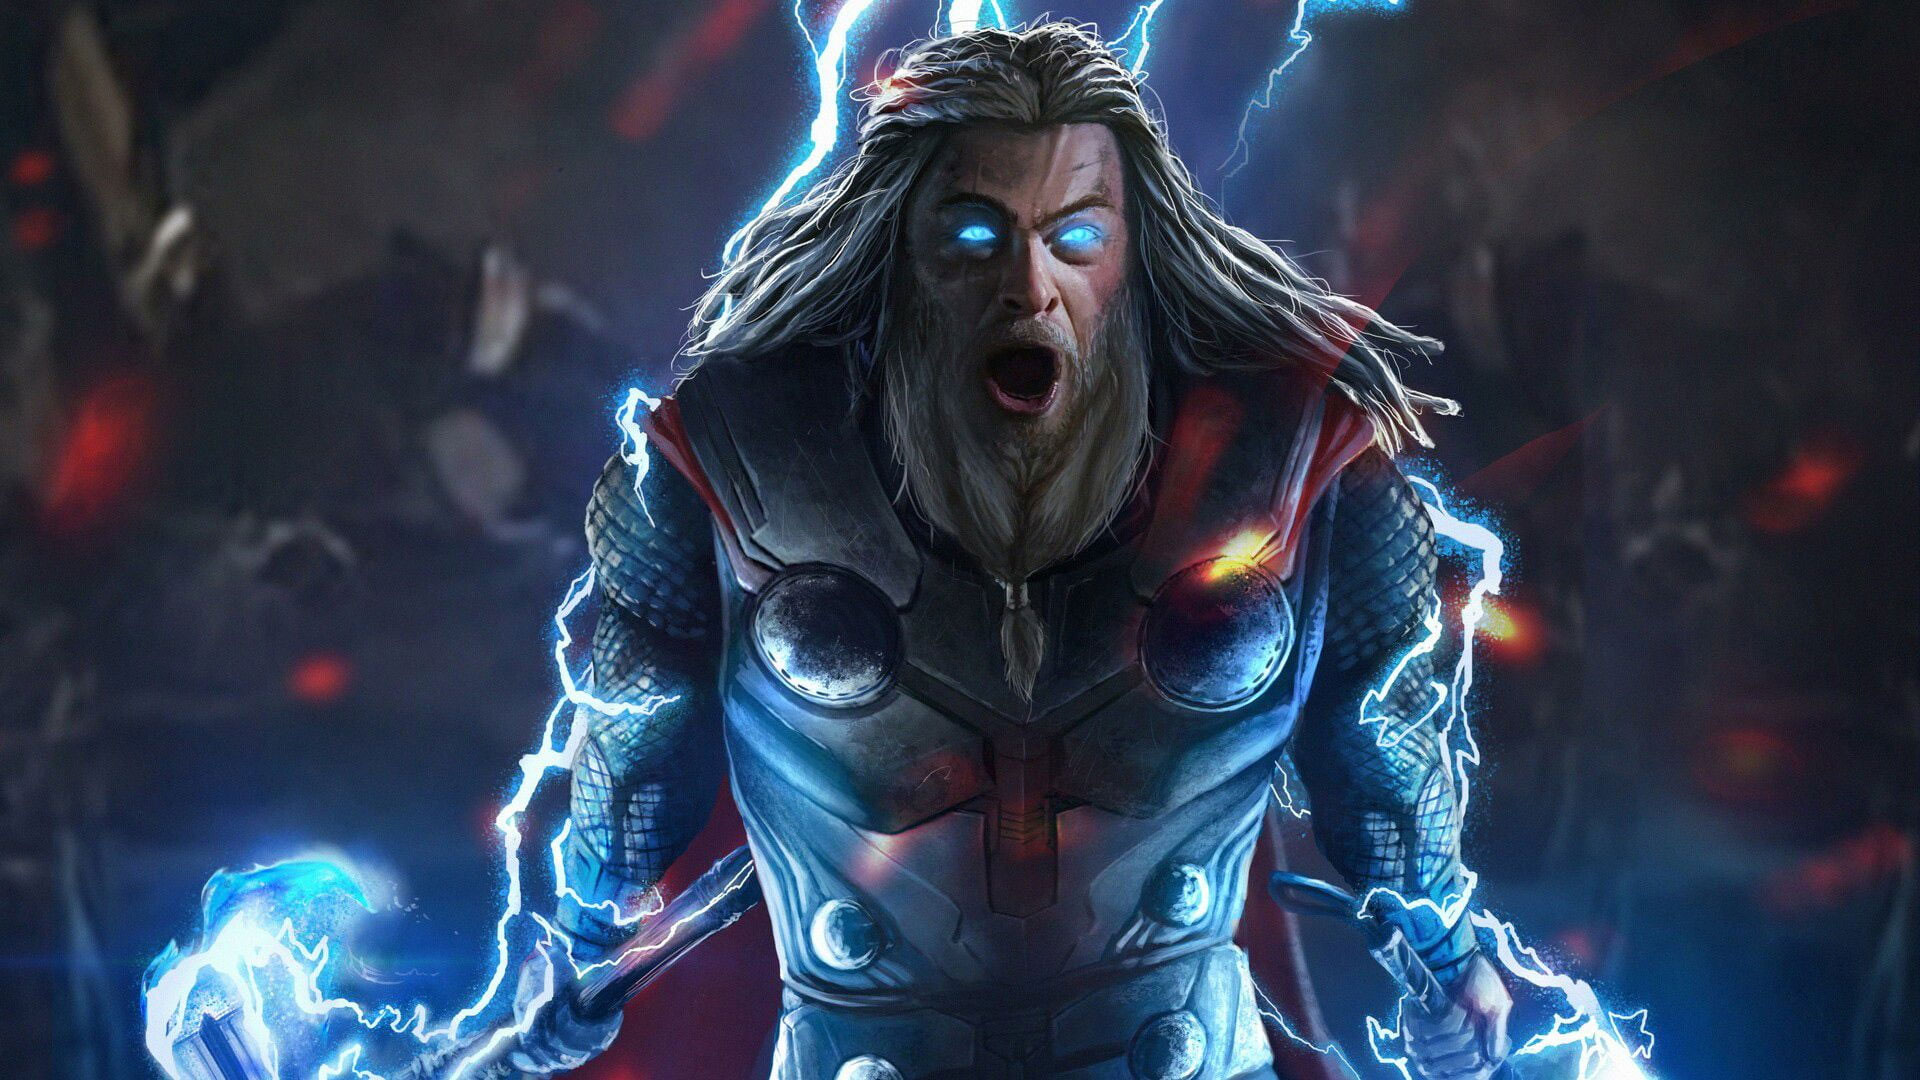 Wallpaper Thor, Fat Thor, Marvel Cinematic Universe